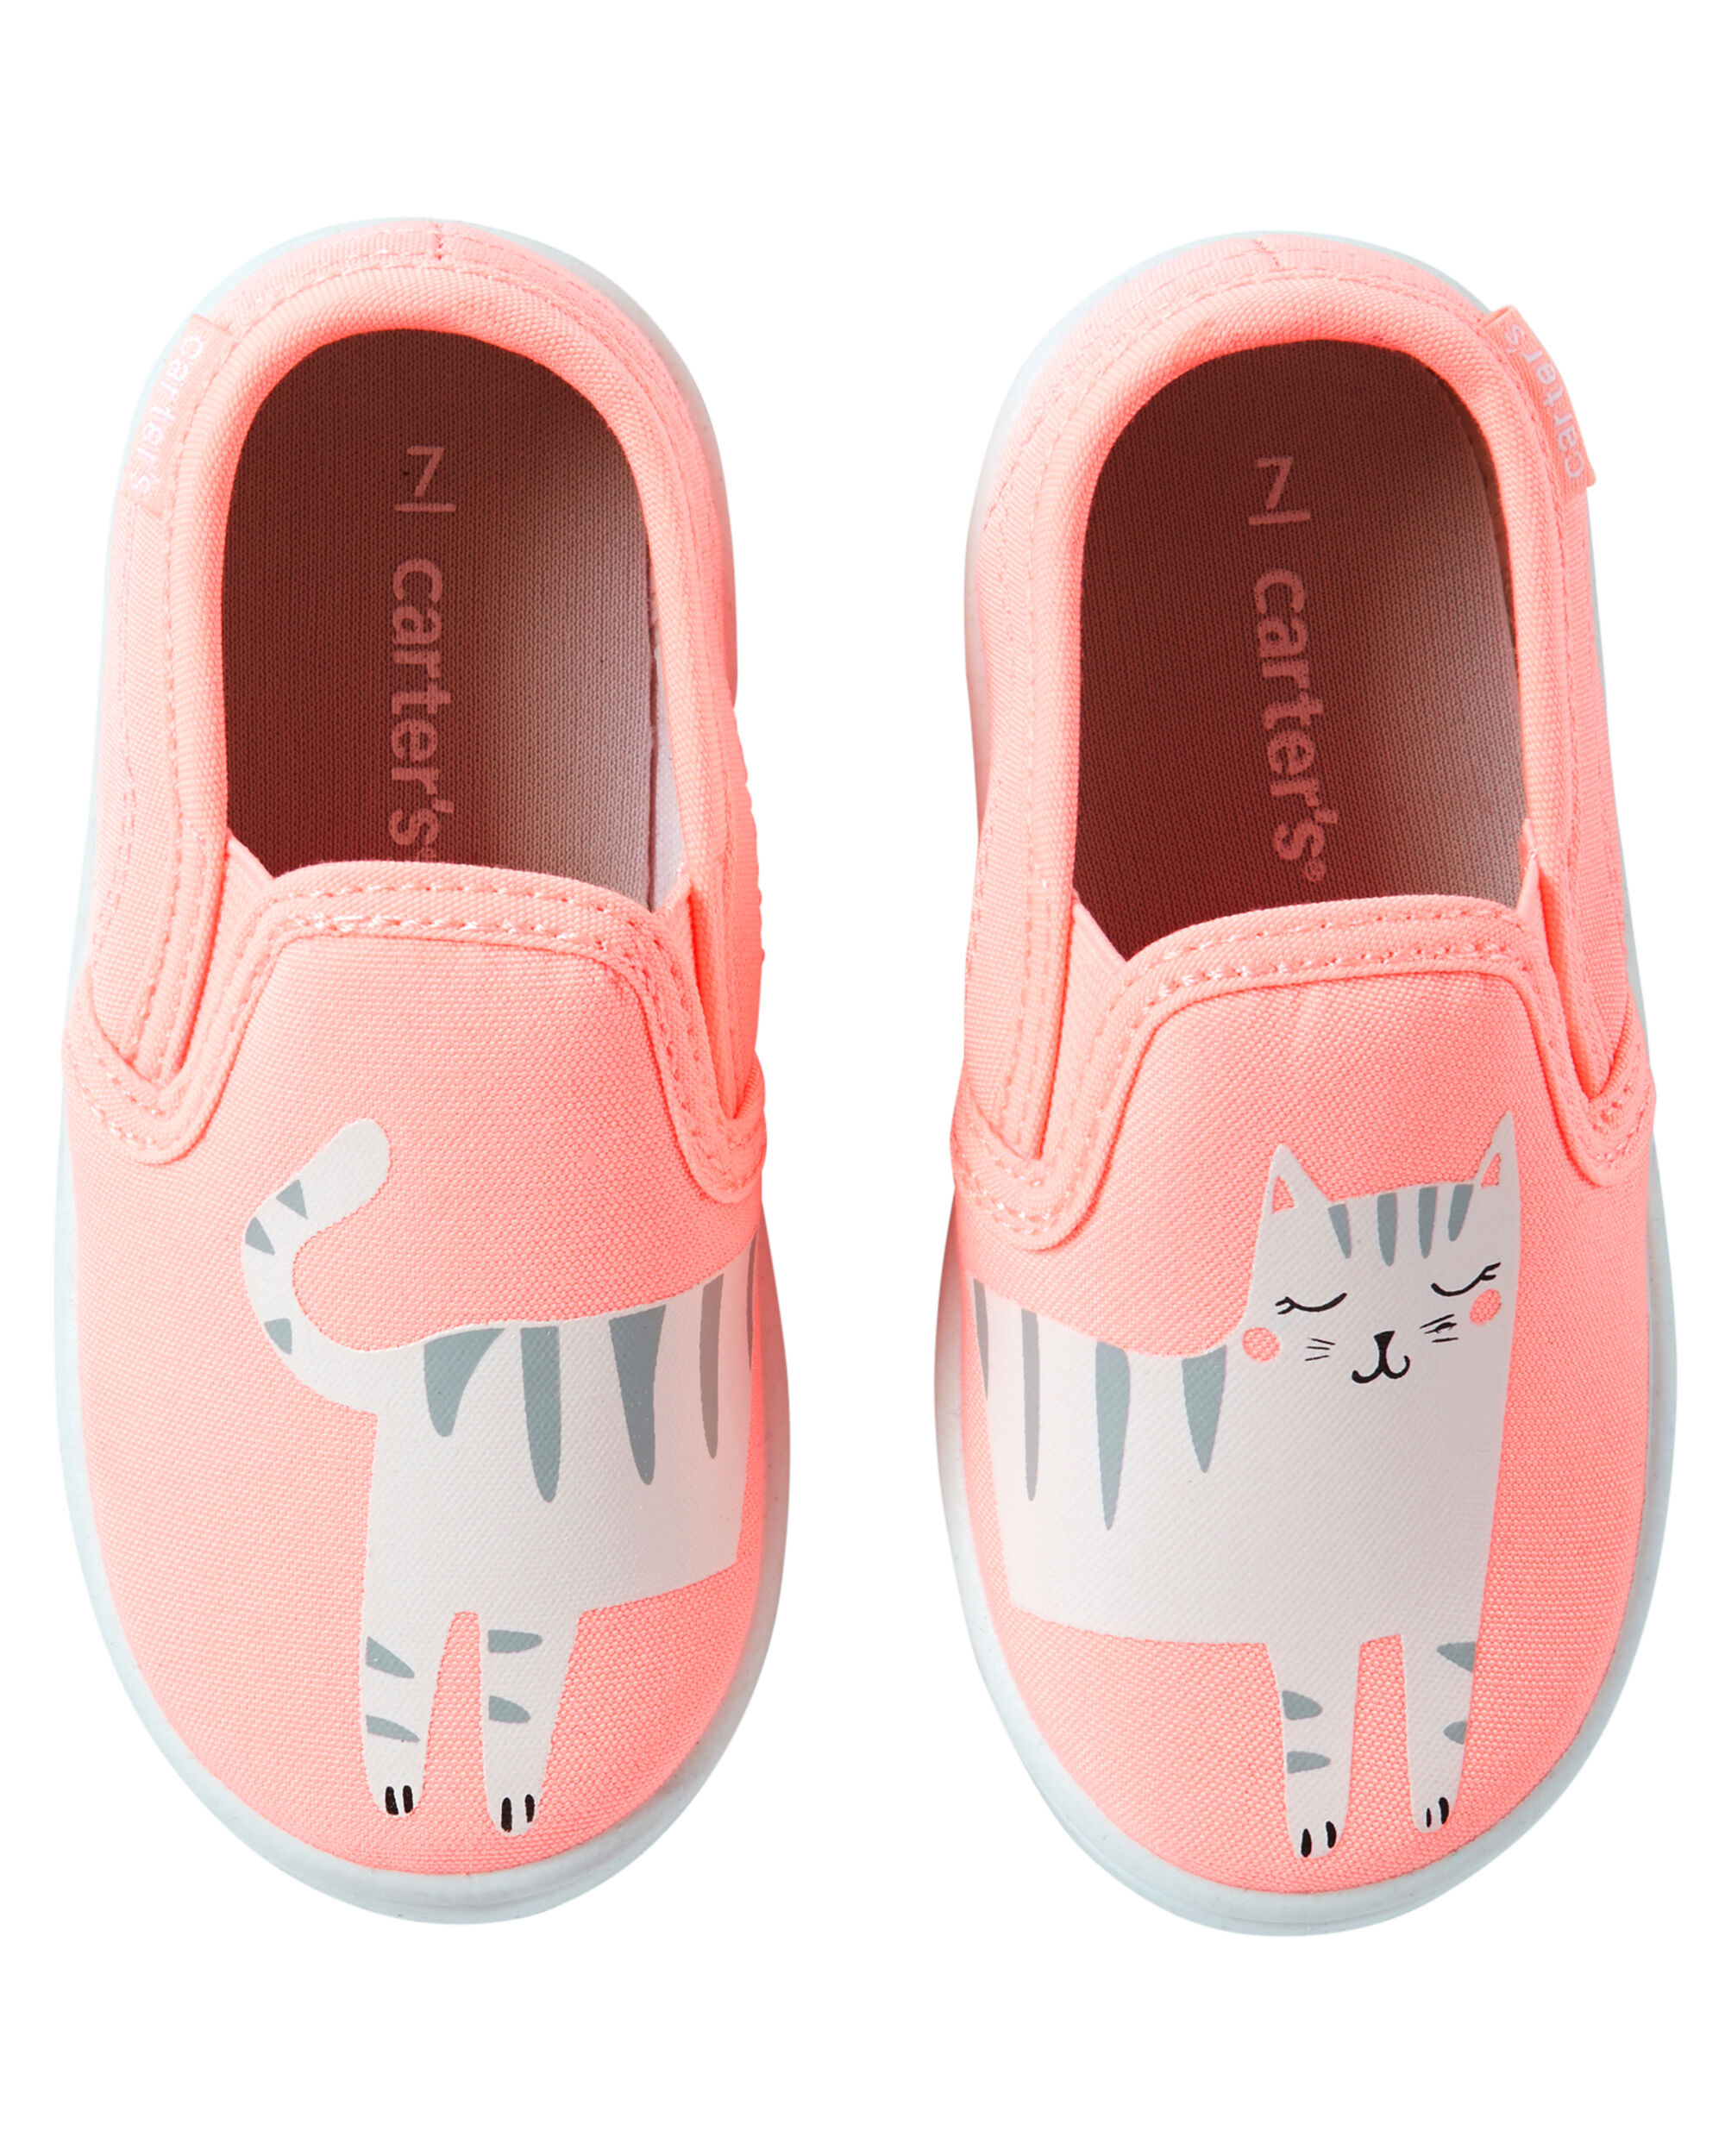 Carter's Kitty Slip-On Shoes | carters.com